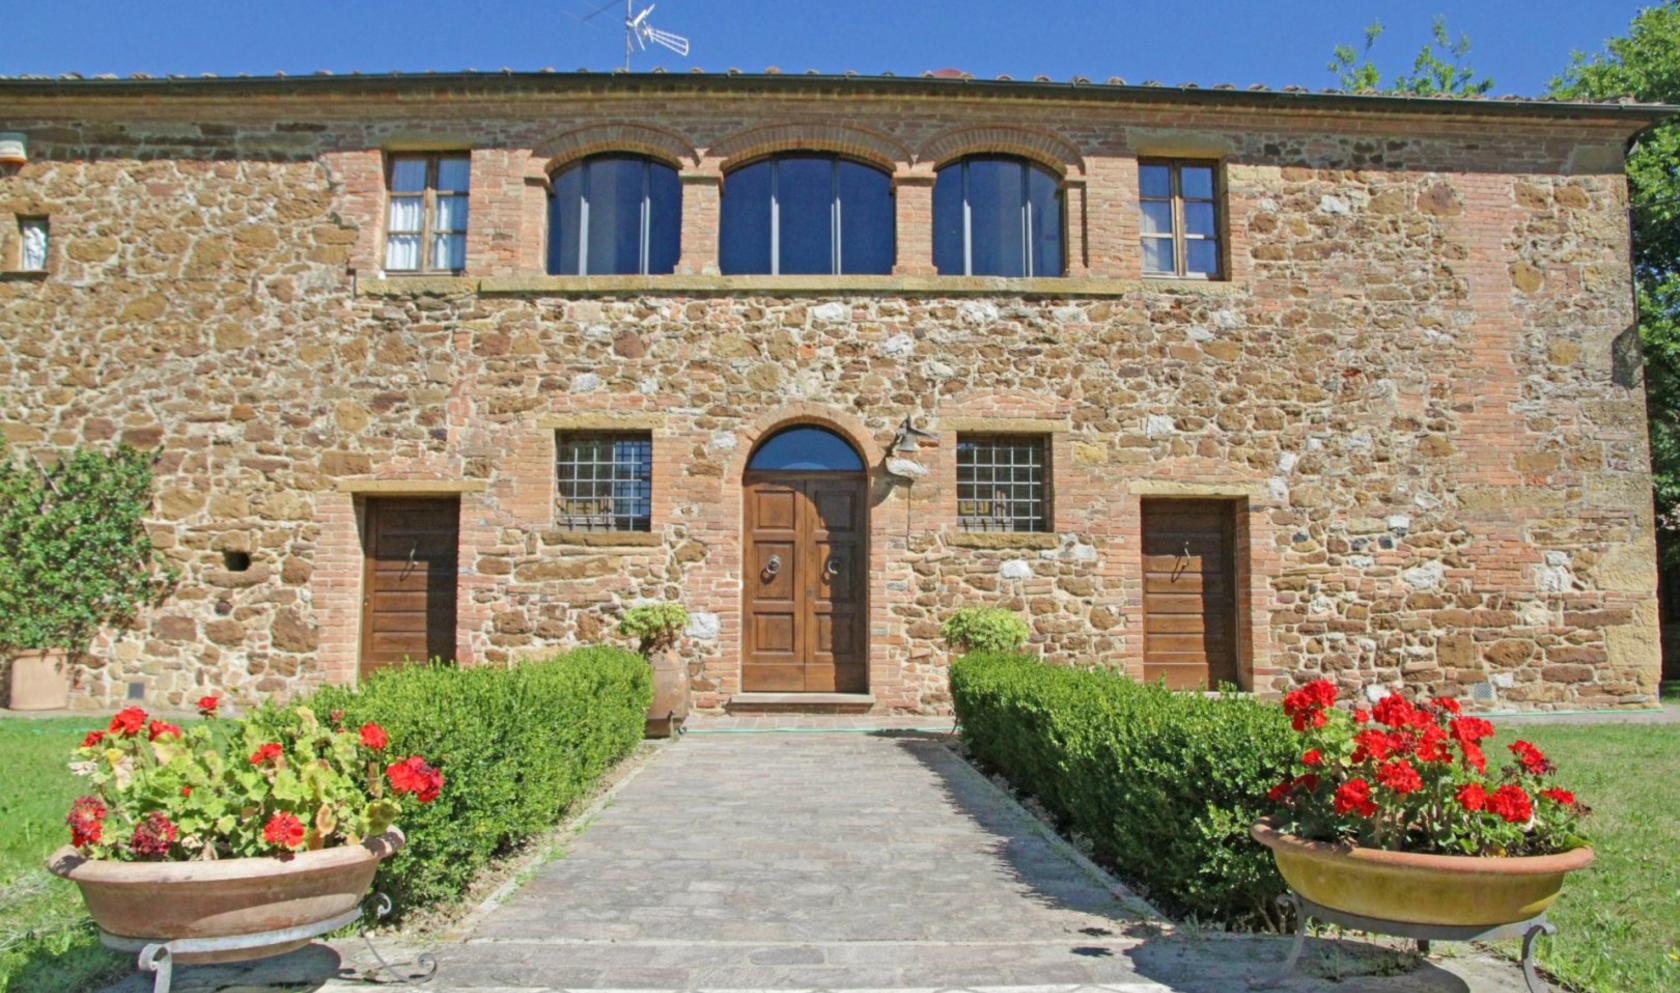 Toscana Immobiliare - Estate for sale near Siena with several houses